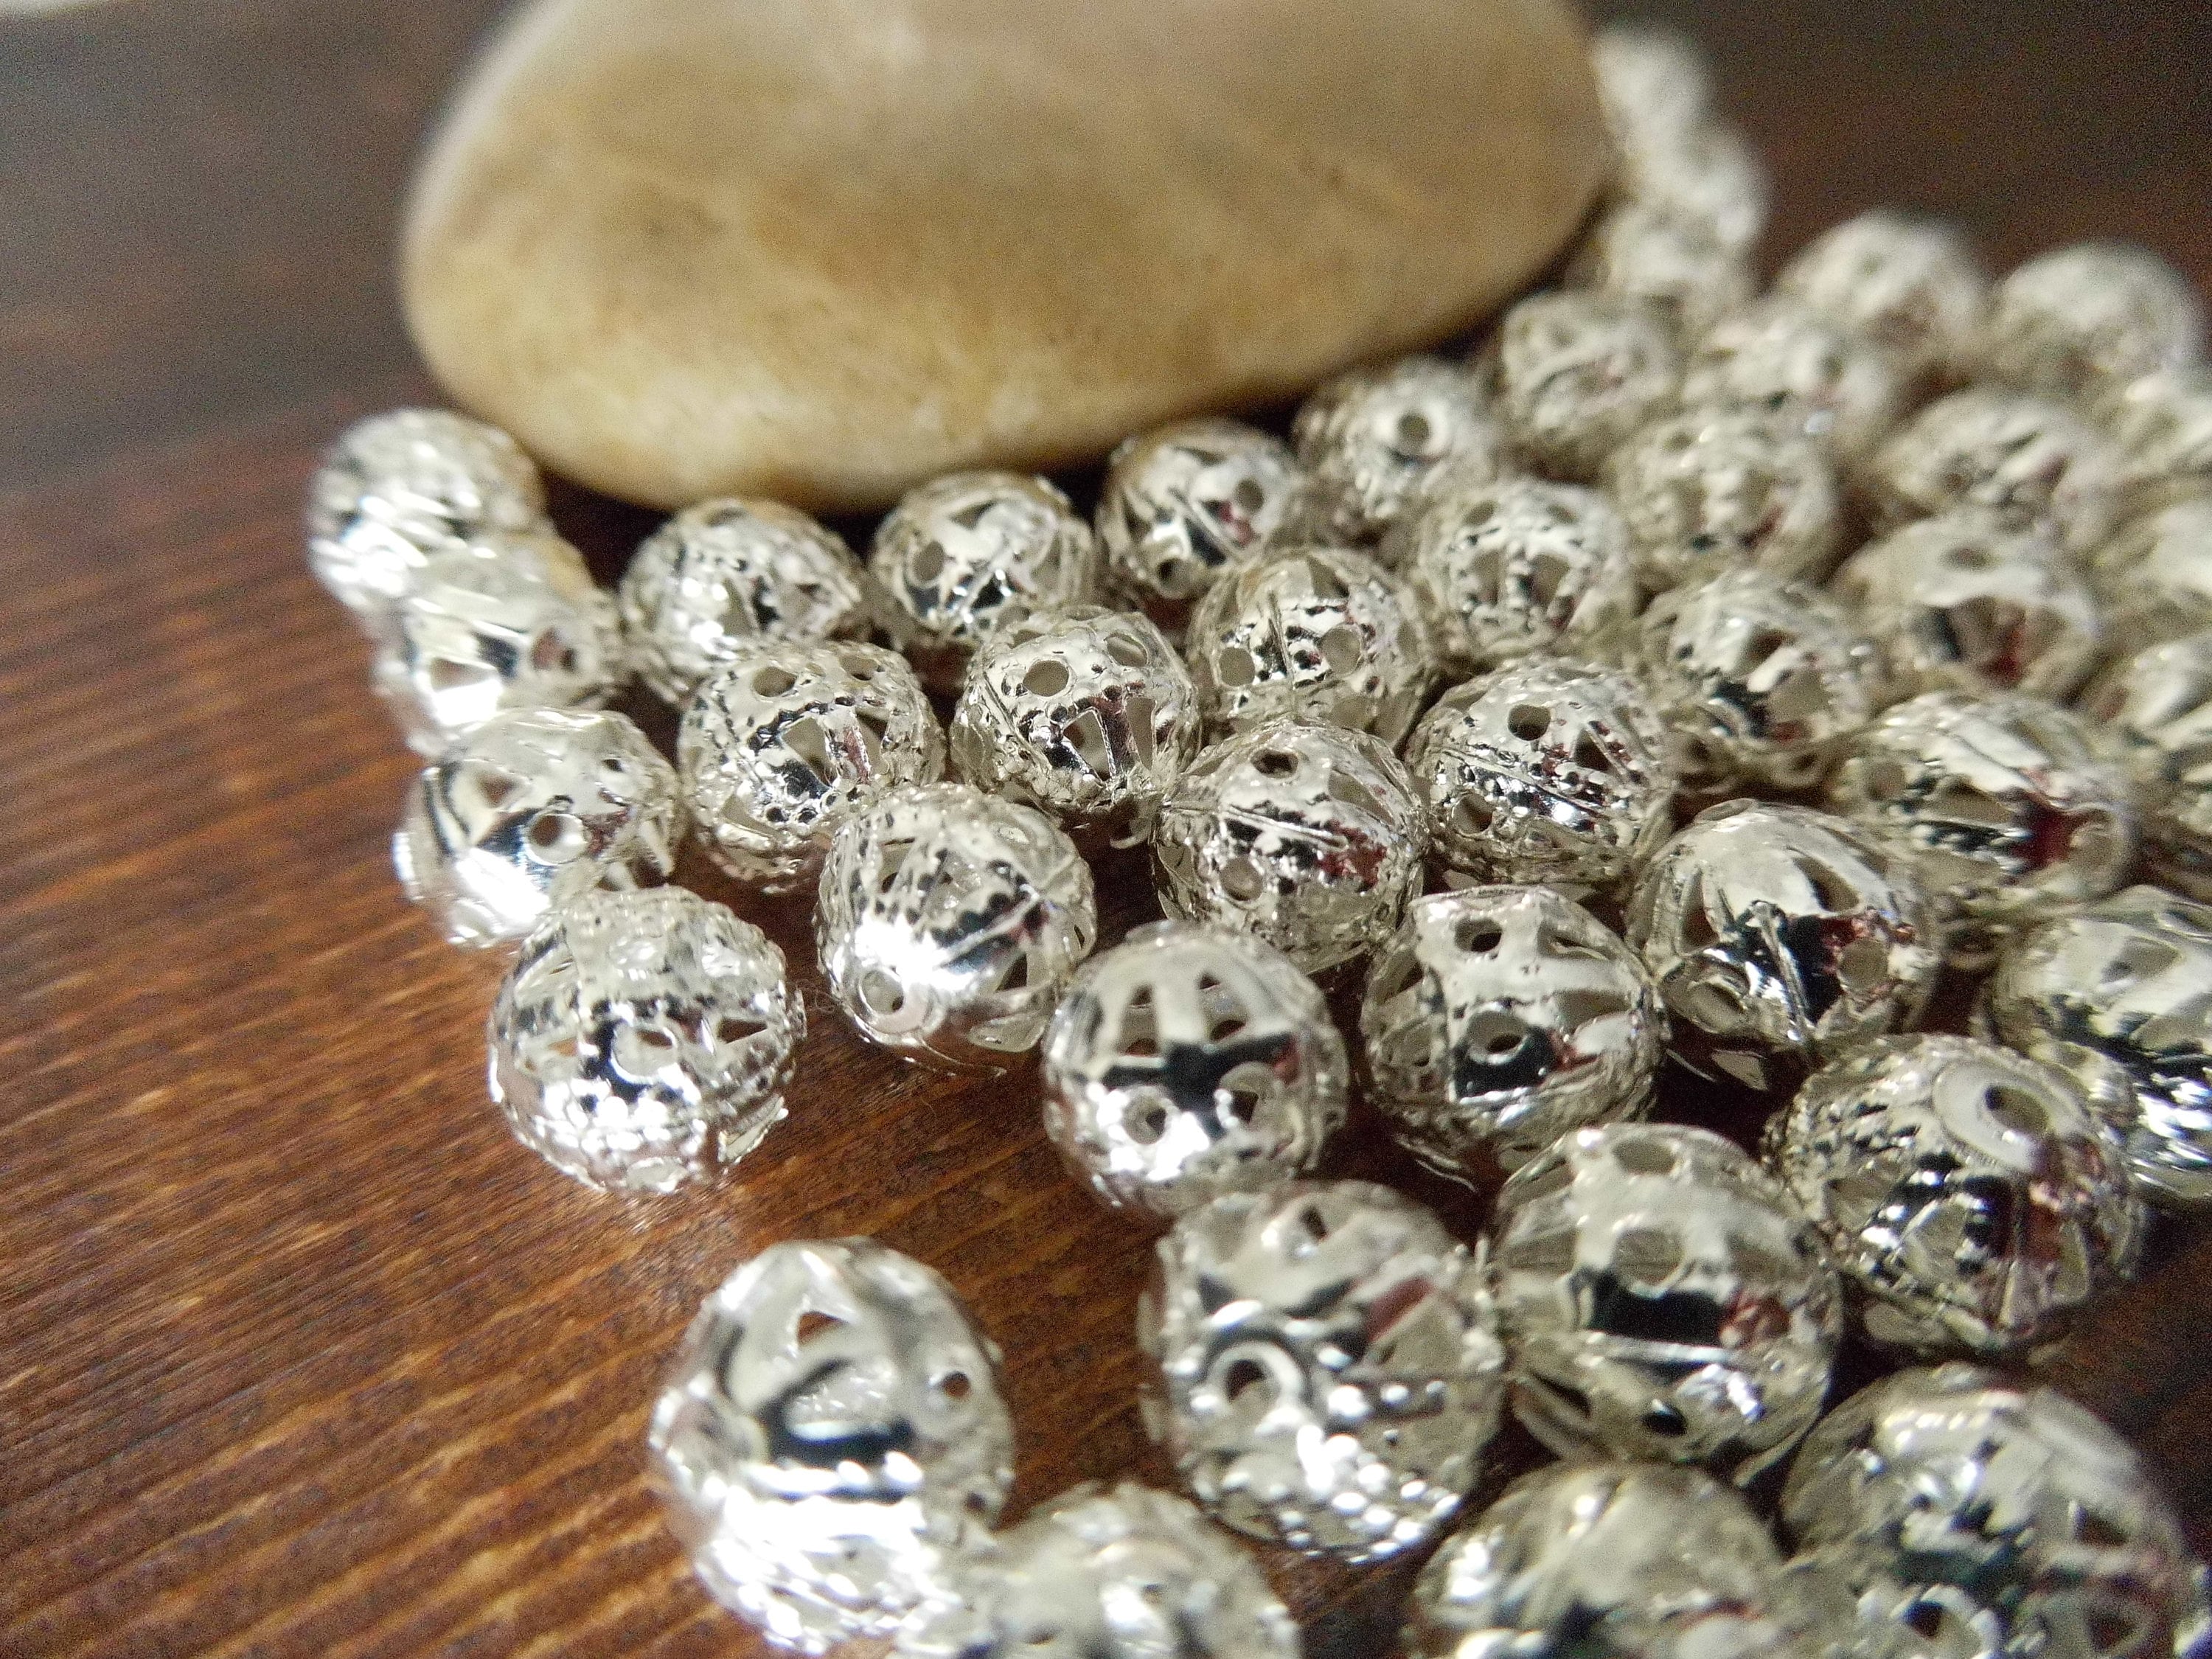 30pc 6mm antique silver finish filigree beads-7602 